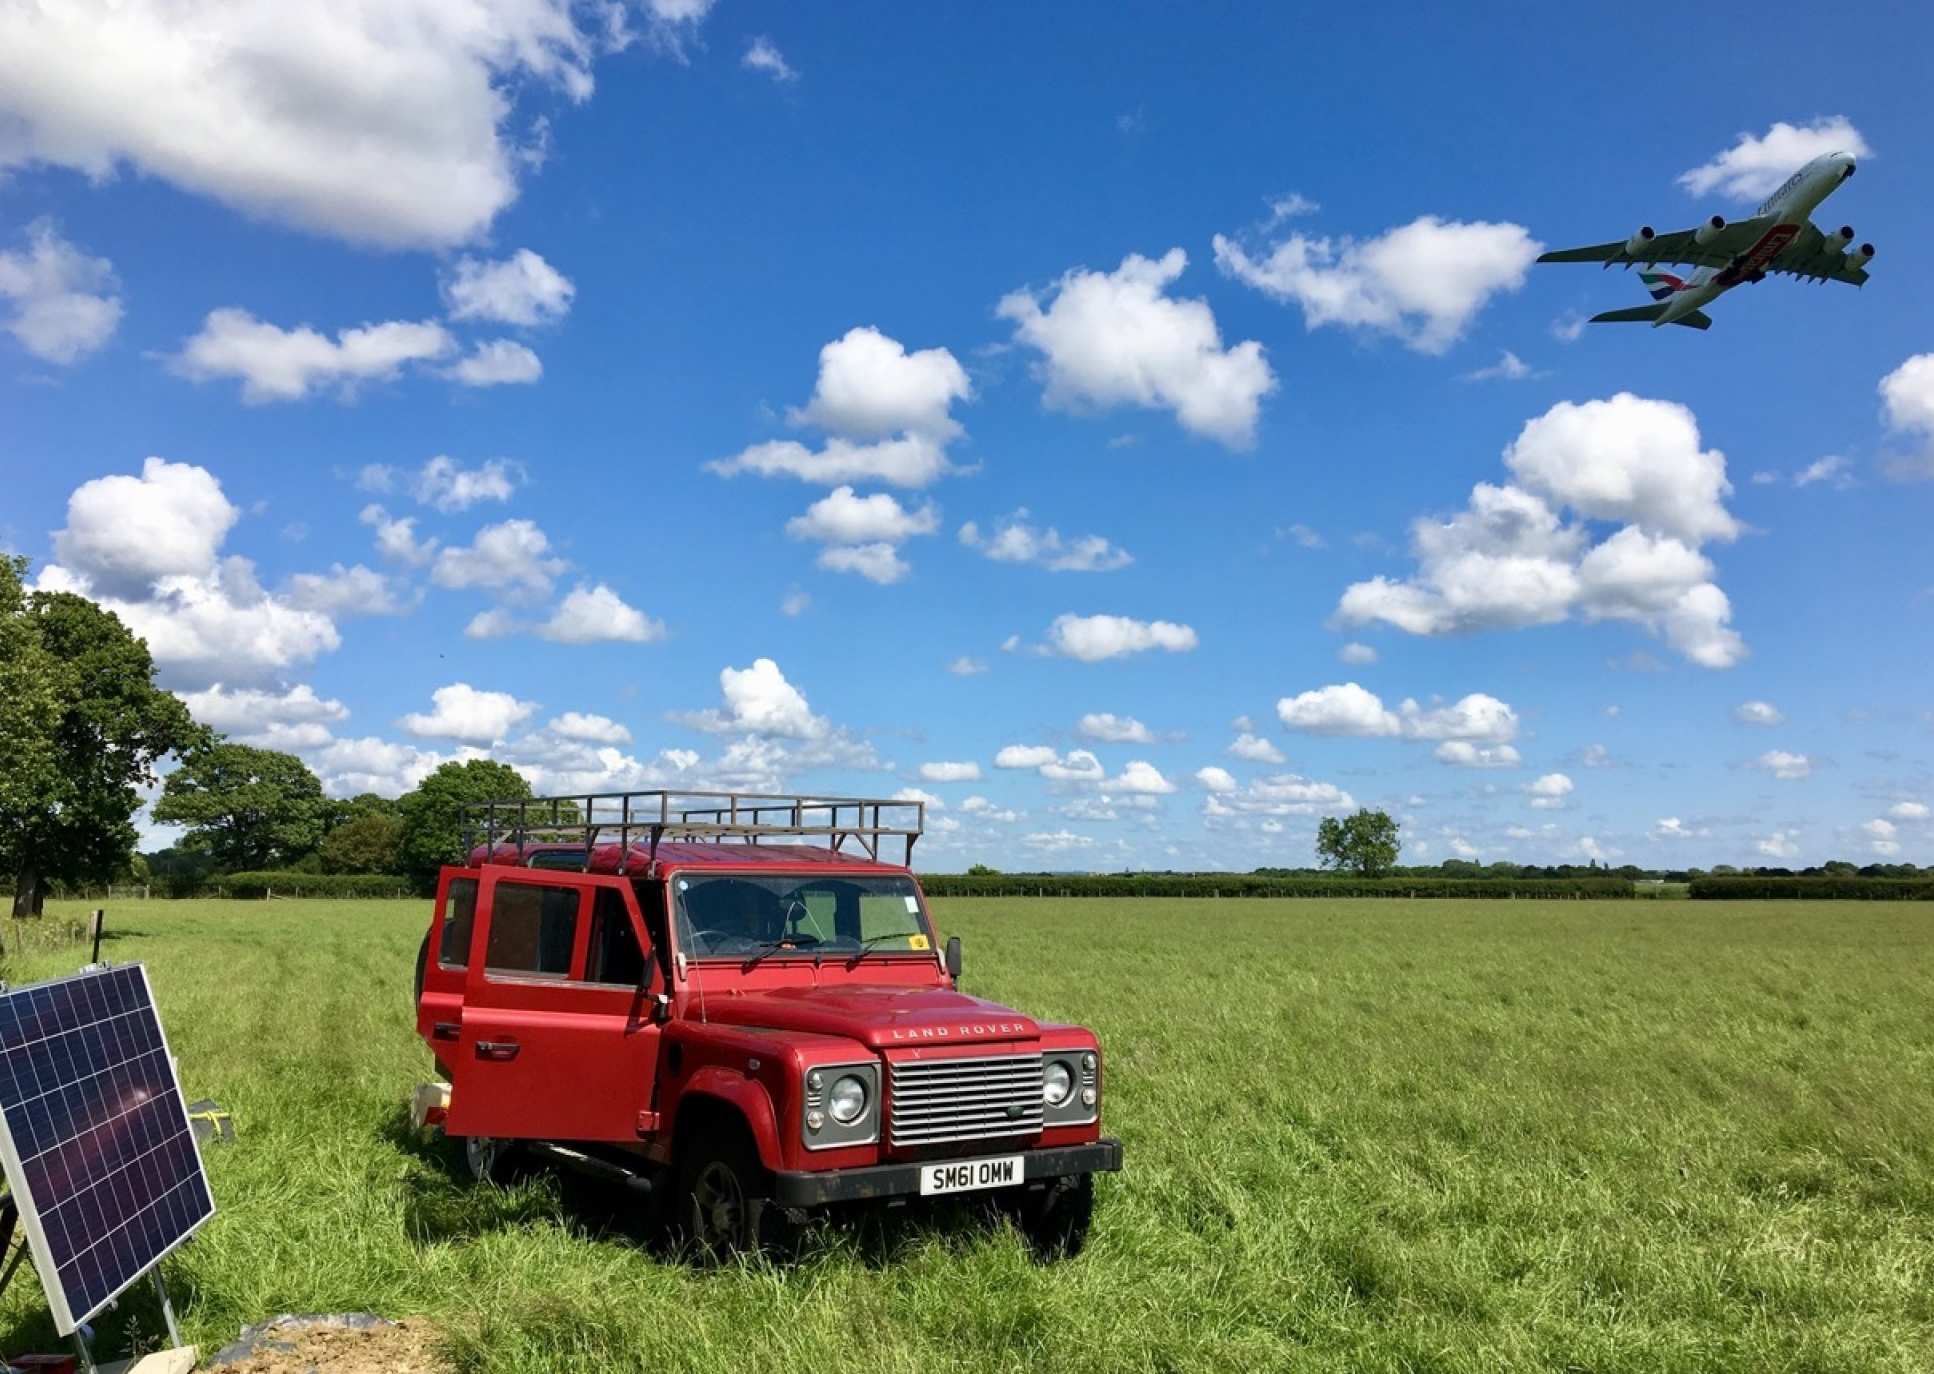 Photo showing car in field in foreground and plane taking off in background